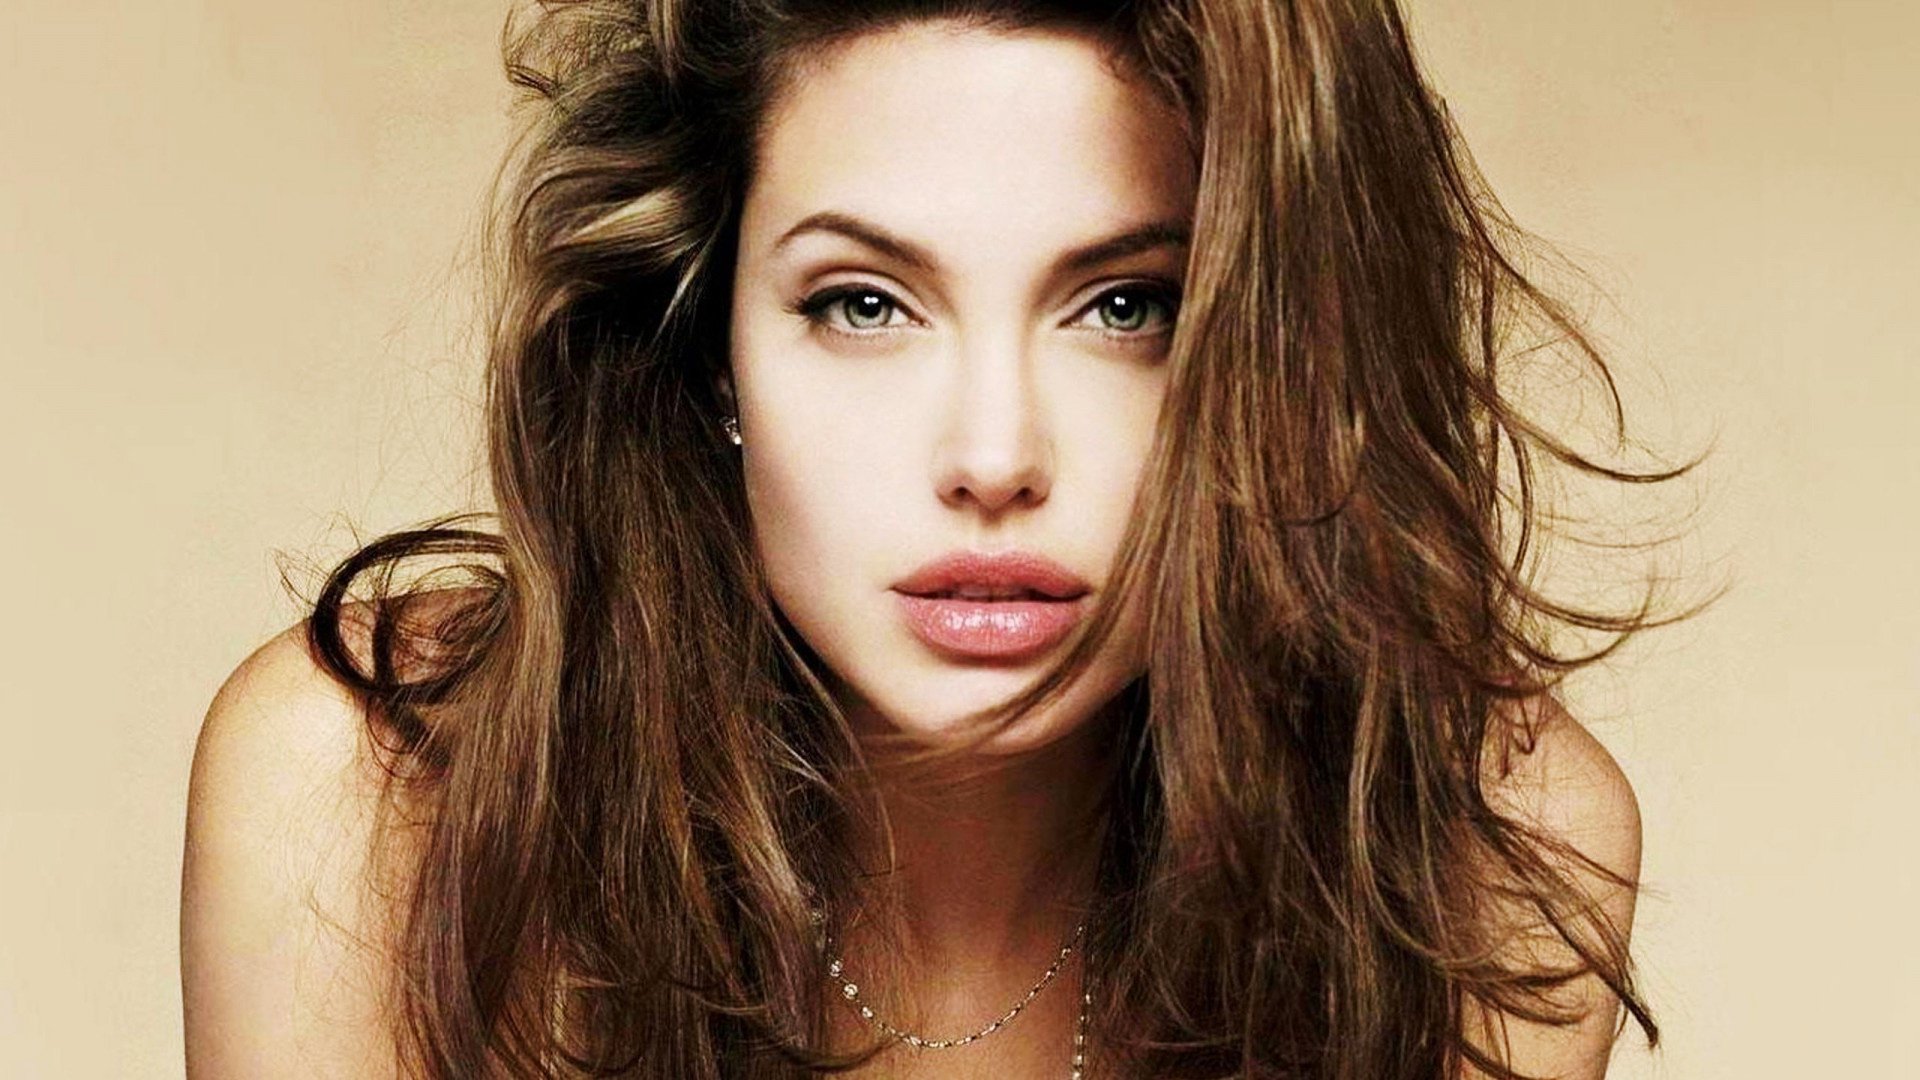 Angelina Jolie Full HD Wallpaper High Definition Quality